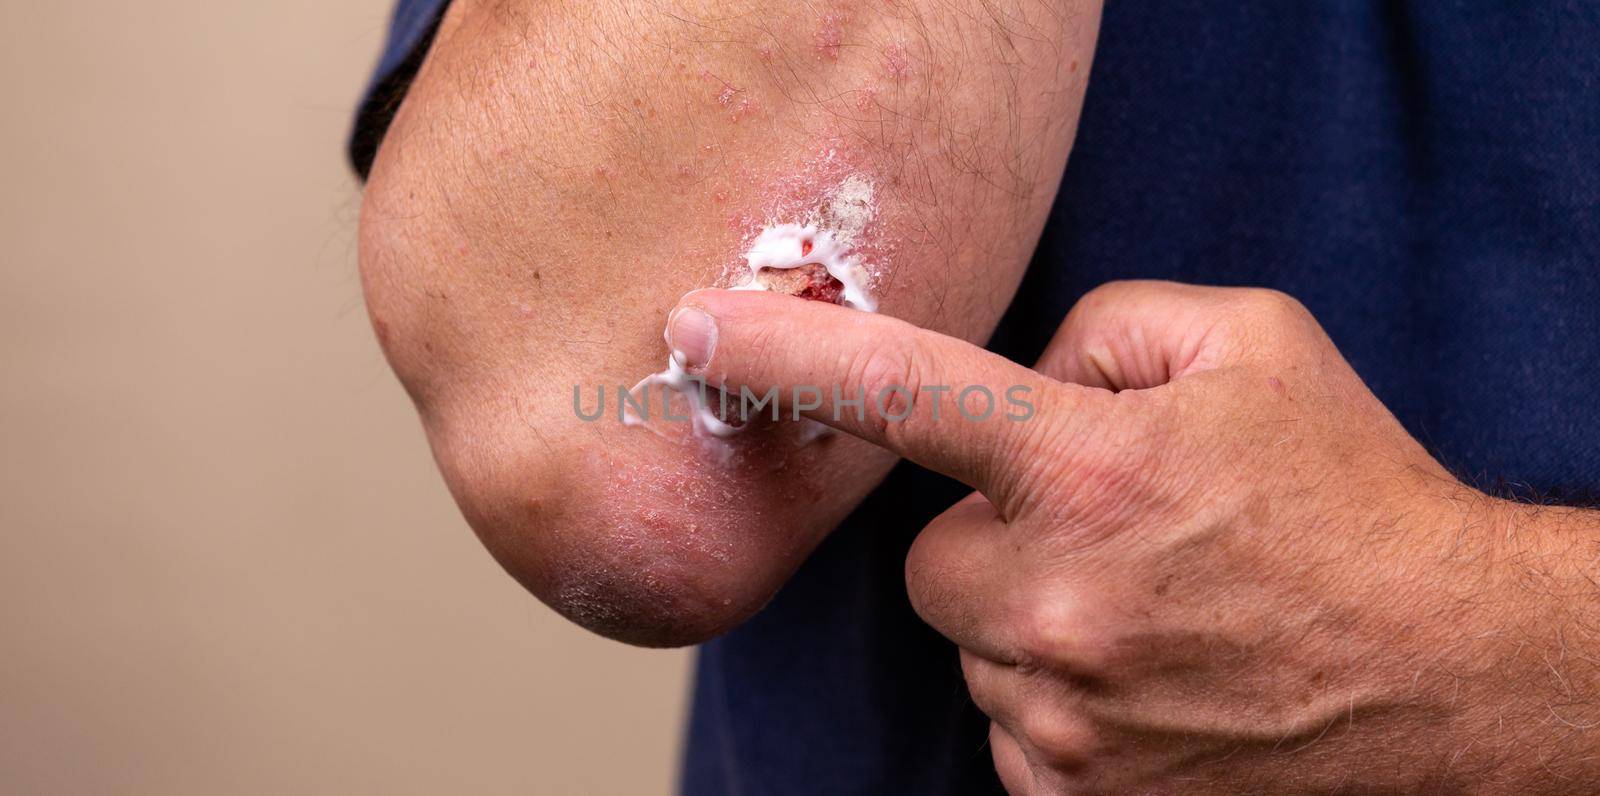 Concept photo of treatment of skin diseases using ointments as dosage form of drug. Patient causes medical therapeutic ointment thick consistency or cream moisturizer on skin in elbow area close-up by lunarts